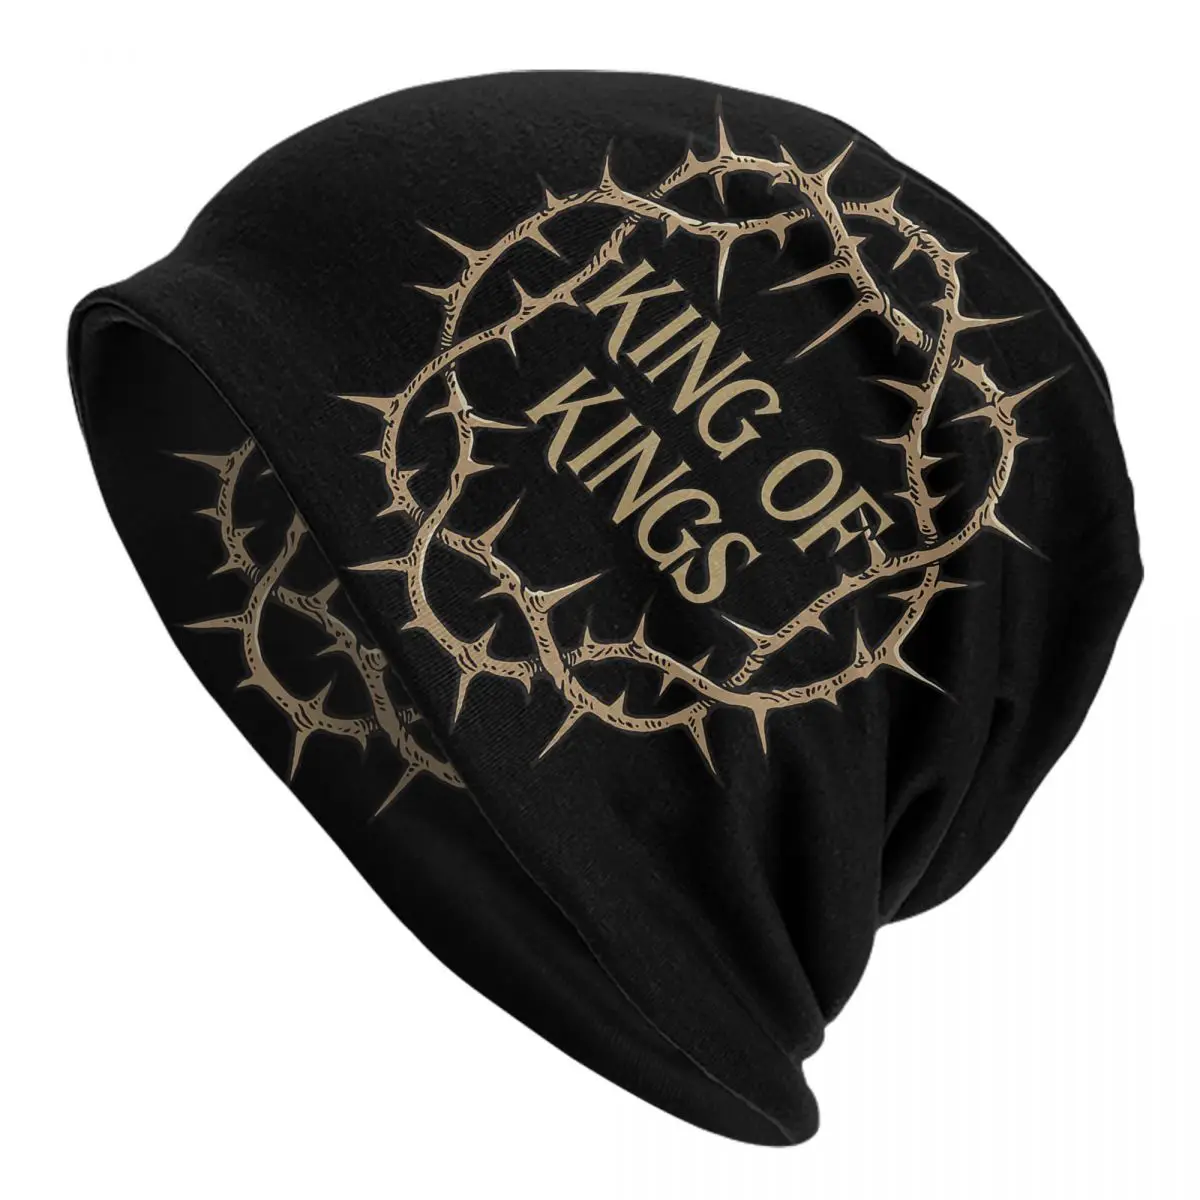 Crown Of Thorns King Of Kings Jesus Adult Men's Women's Knit Hat Keep warm winter knitted hat